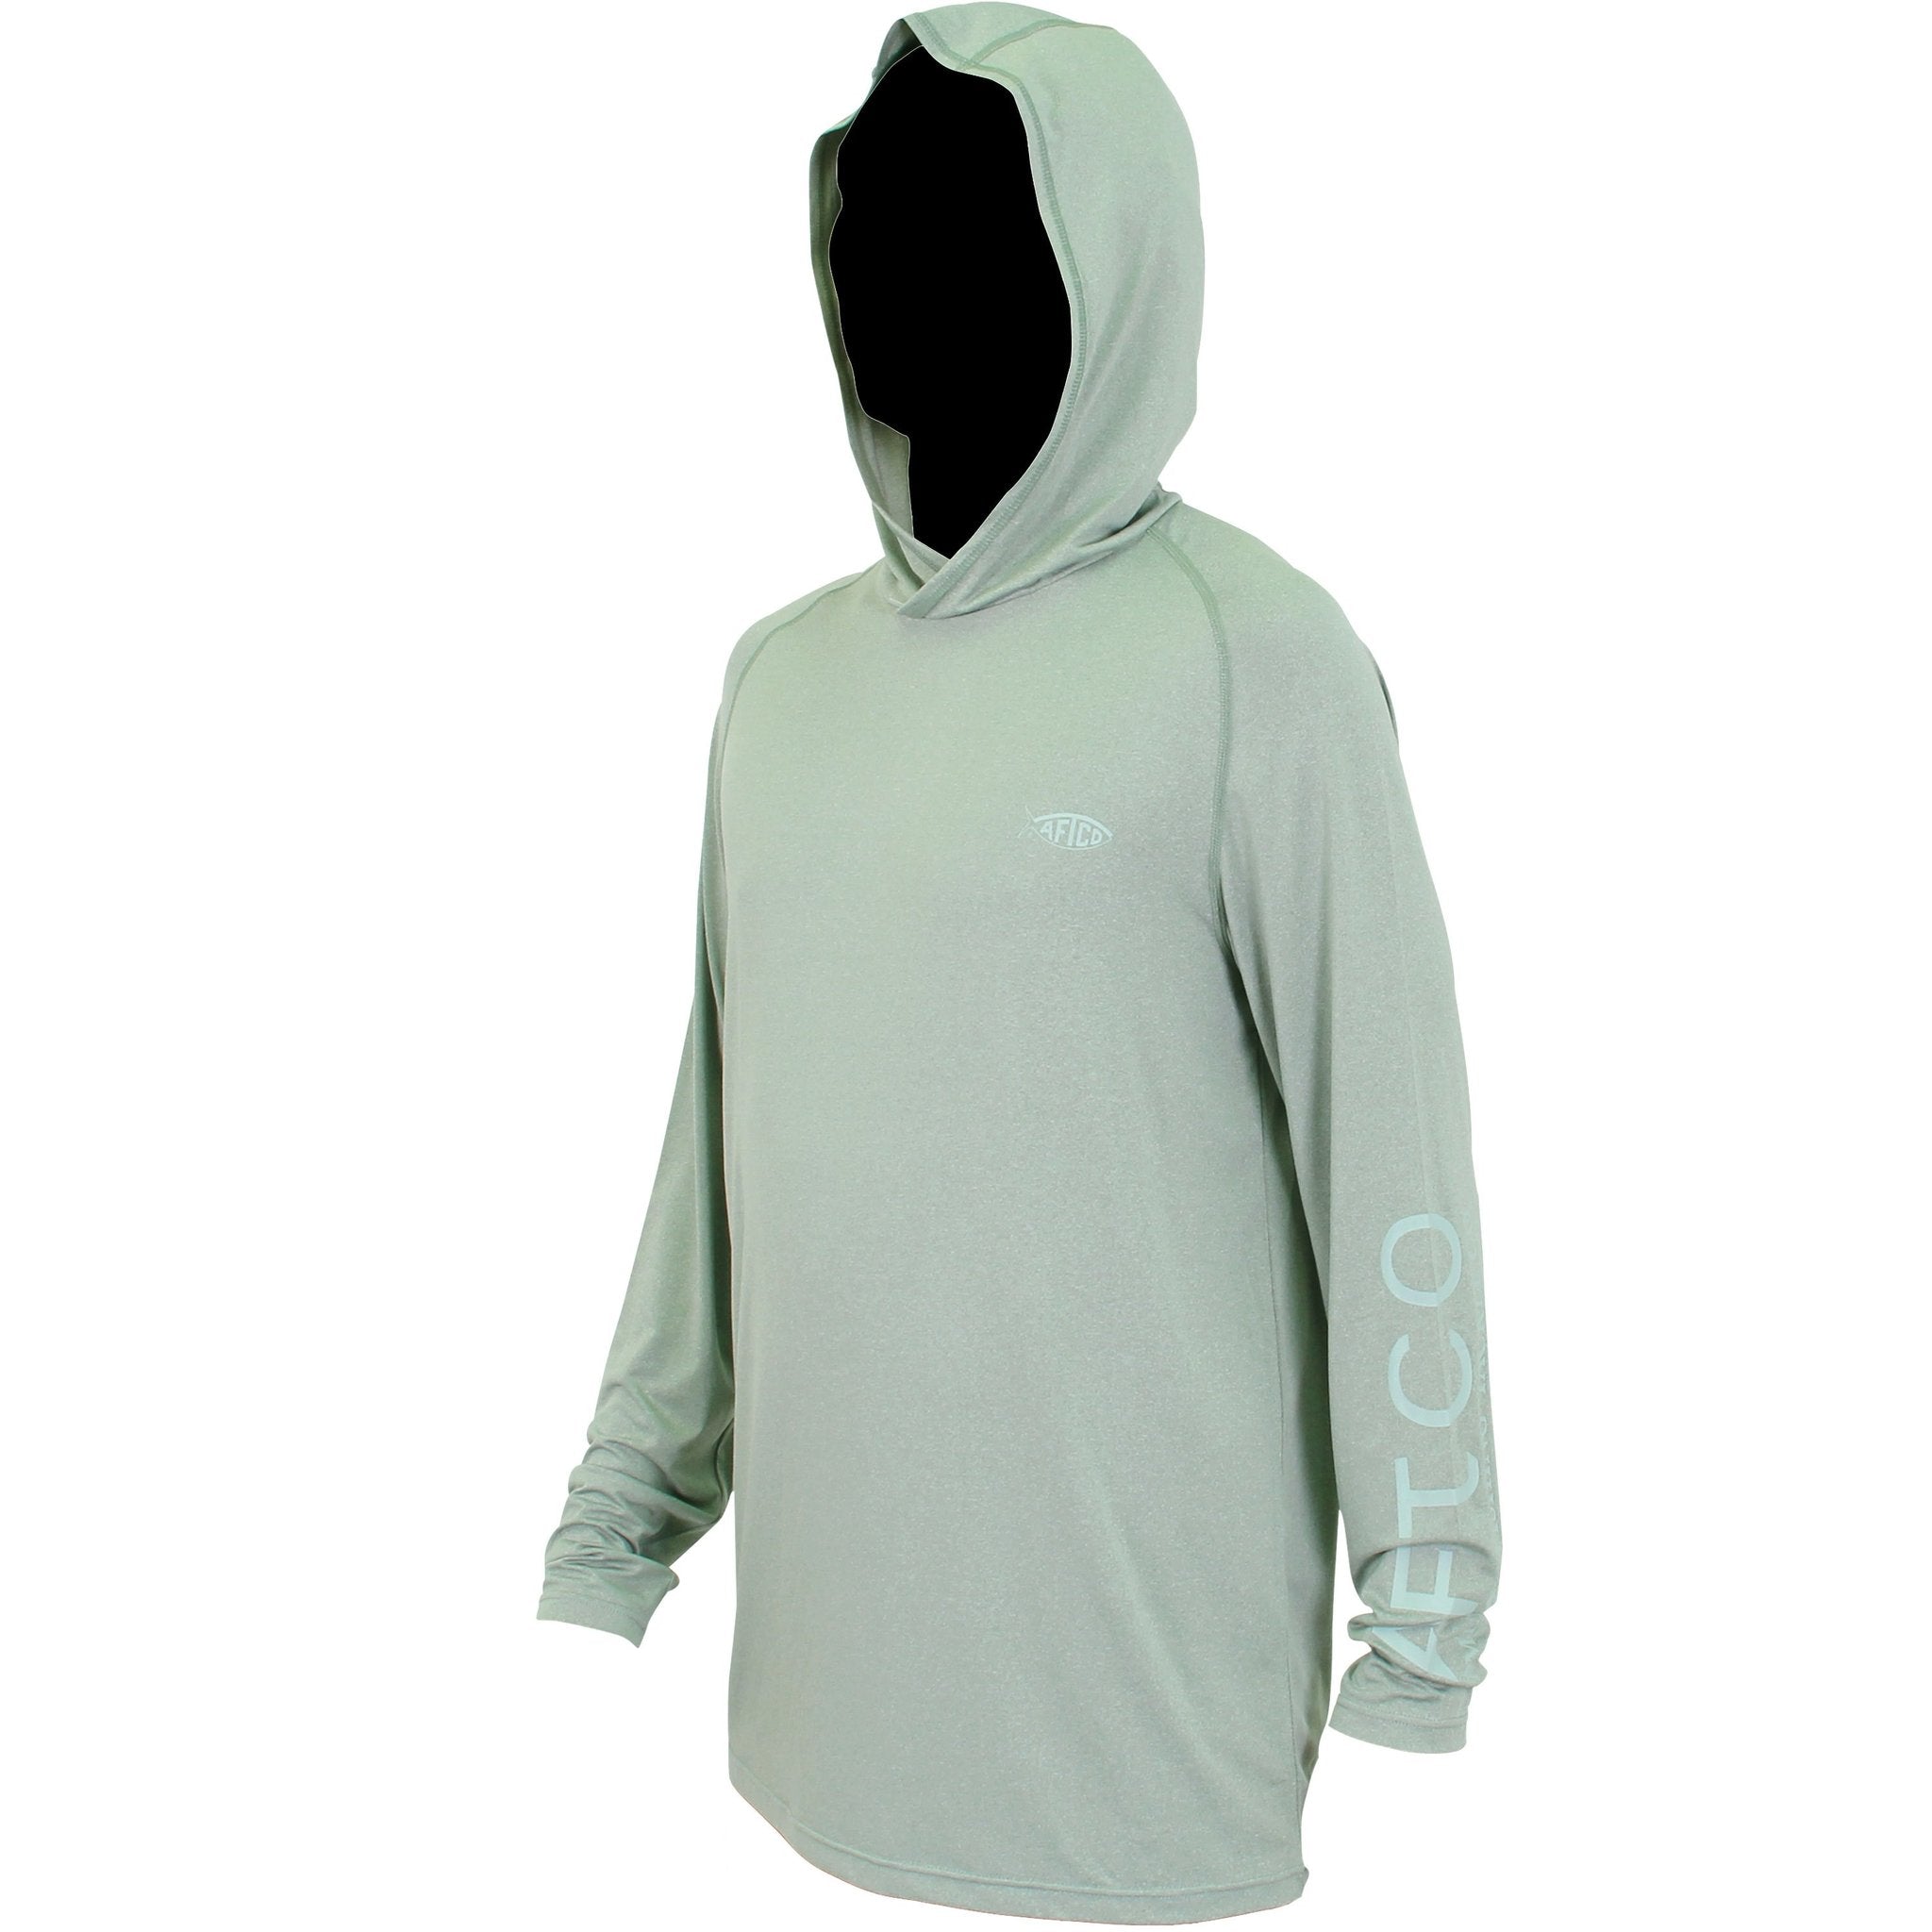 AFTCO DRP Hooded Performance Fishing Shirt – Blue Magnum Heather